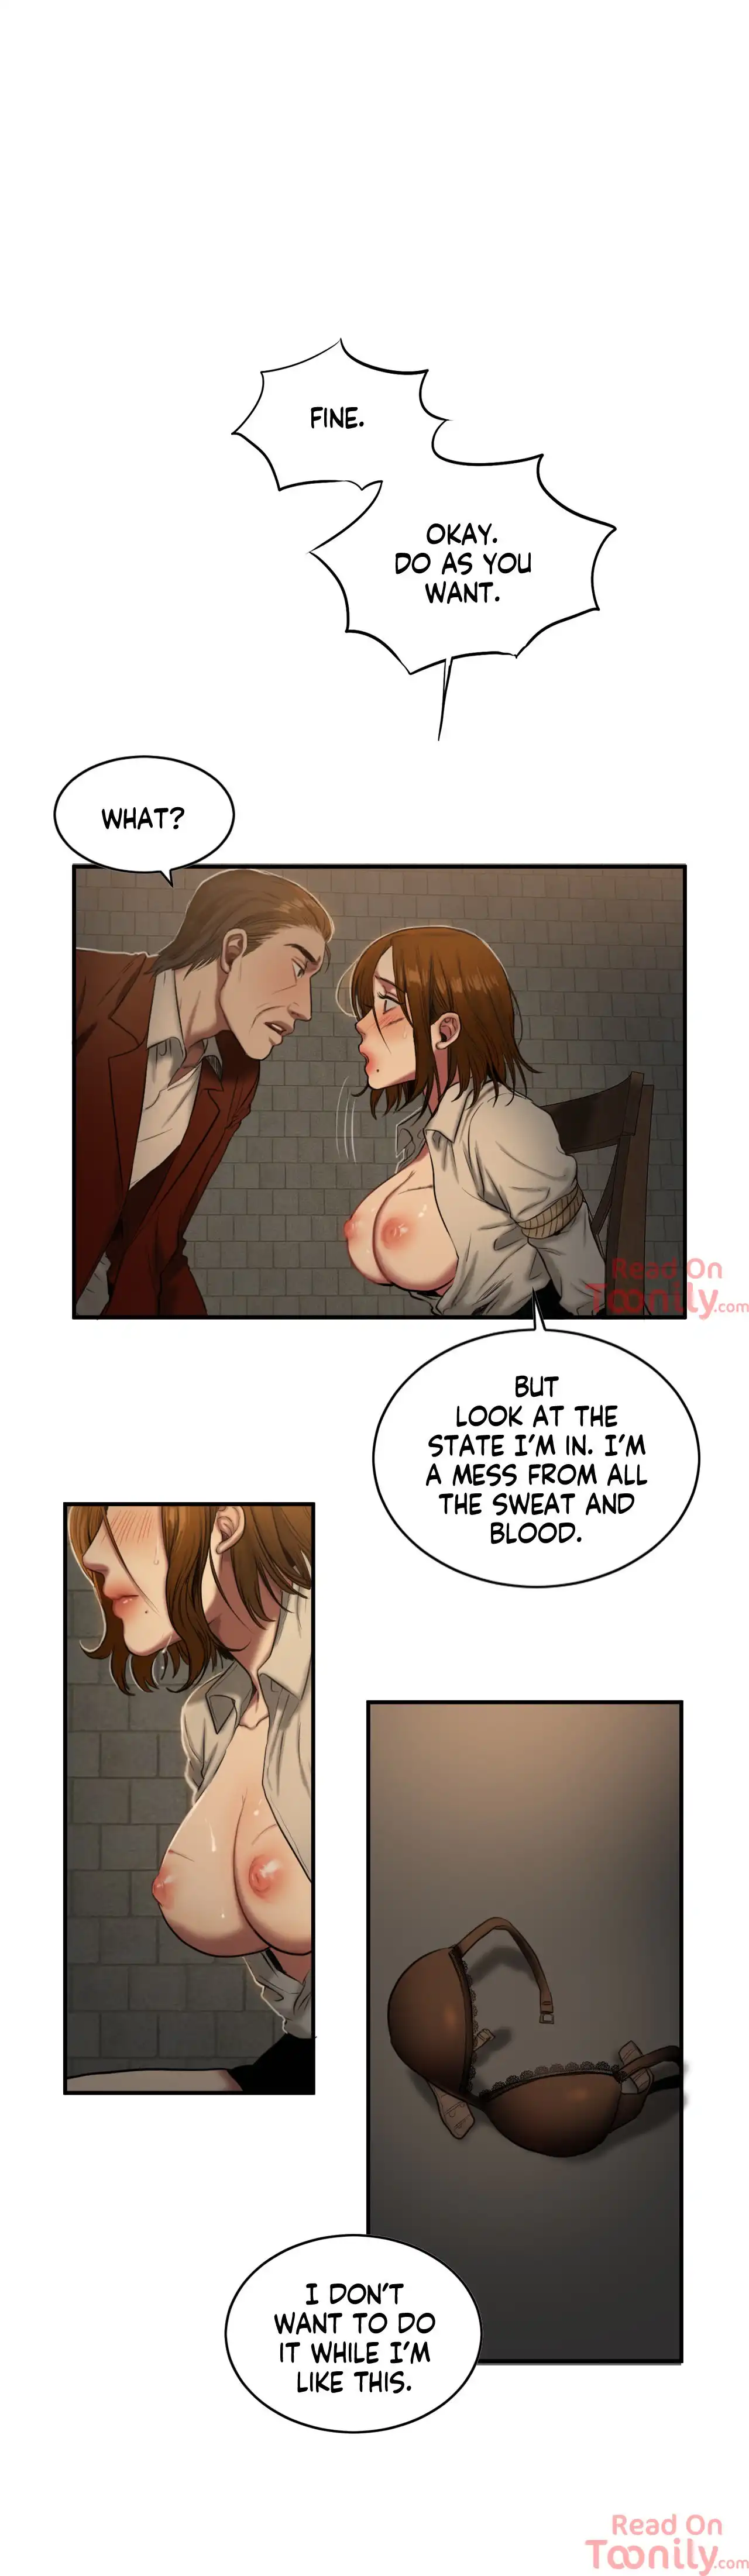 Bittersweet - Chapter 48 Page 6